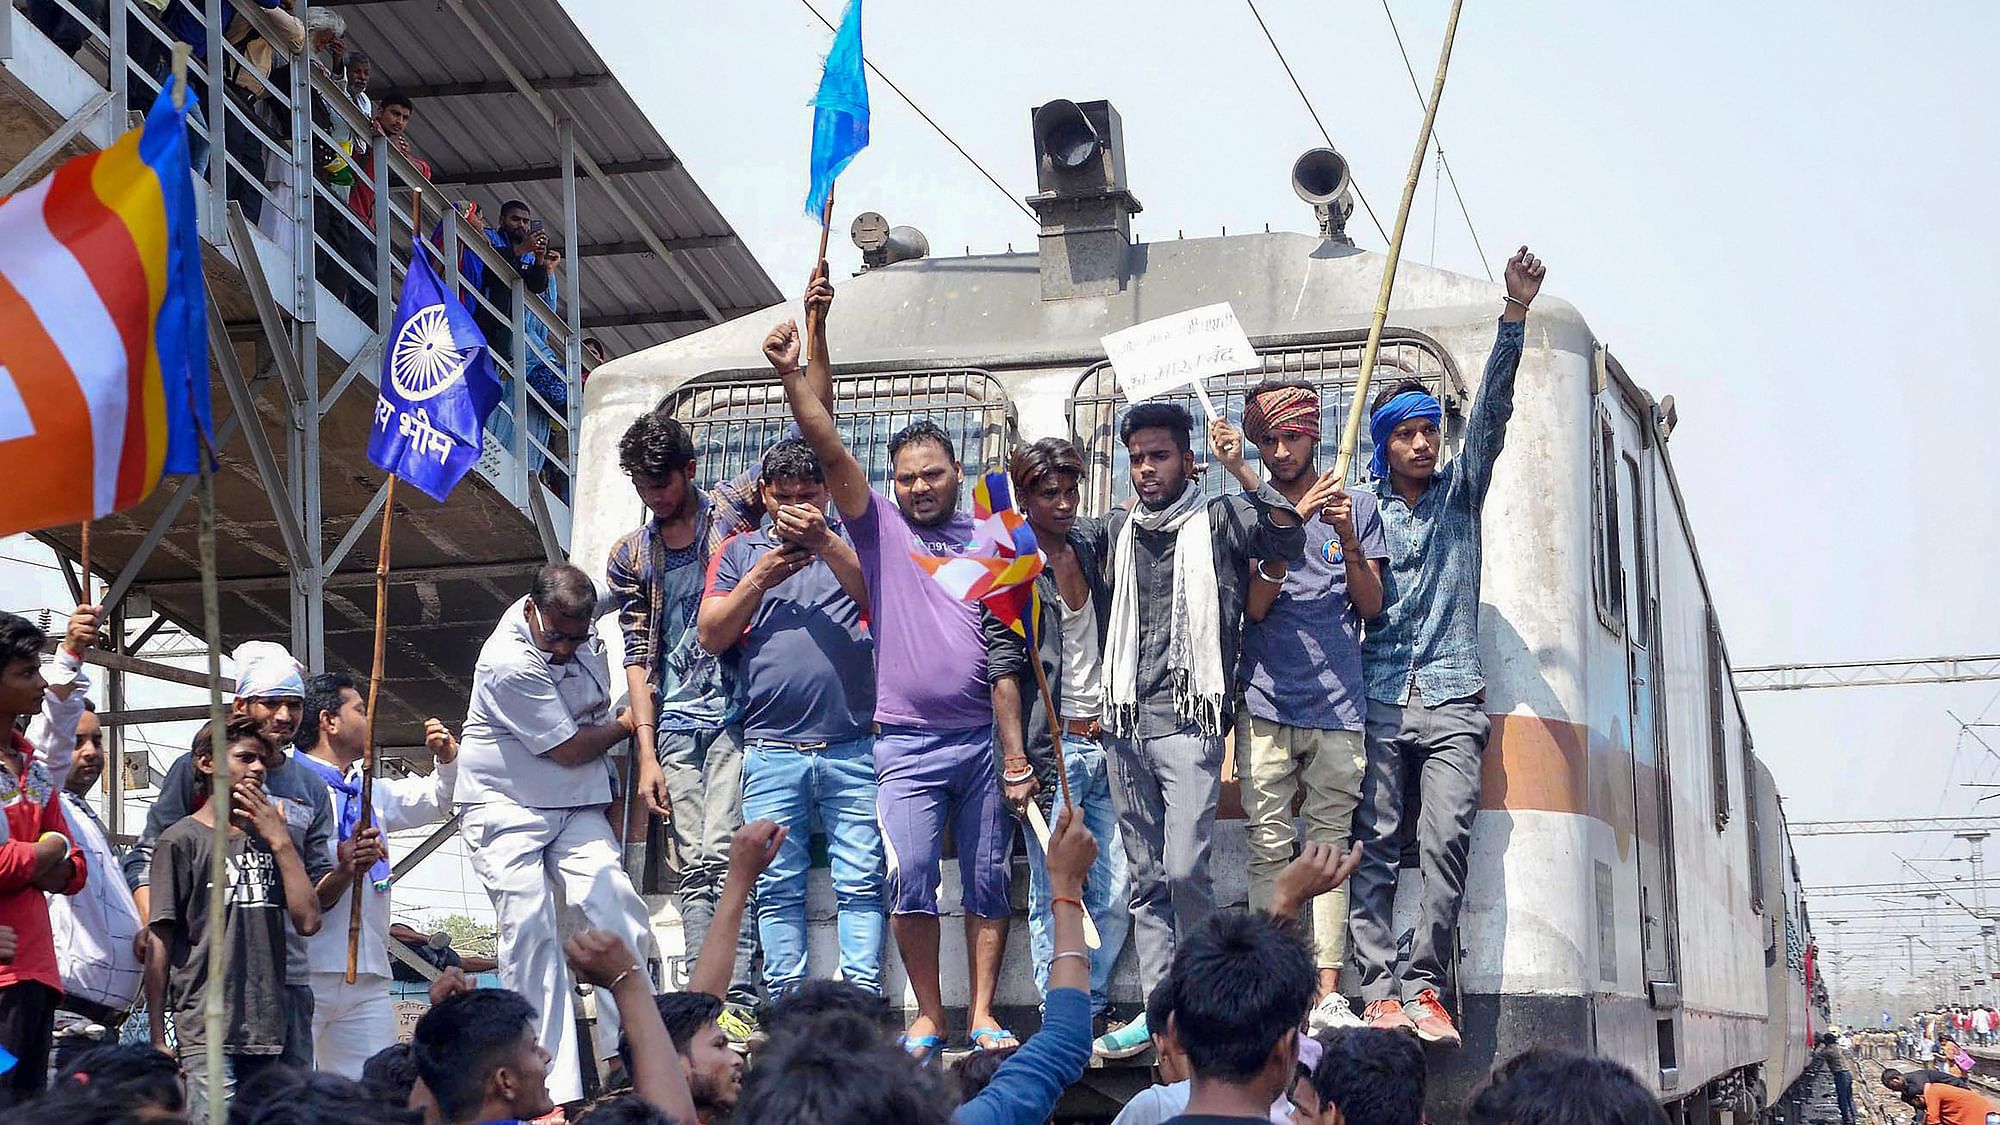 Members of the Dalit community stop a train in Mathura on 2 April during the Bharat Bandh.